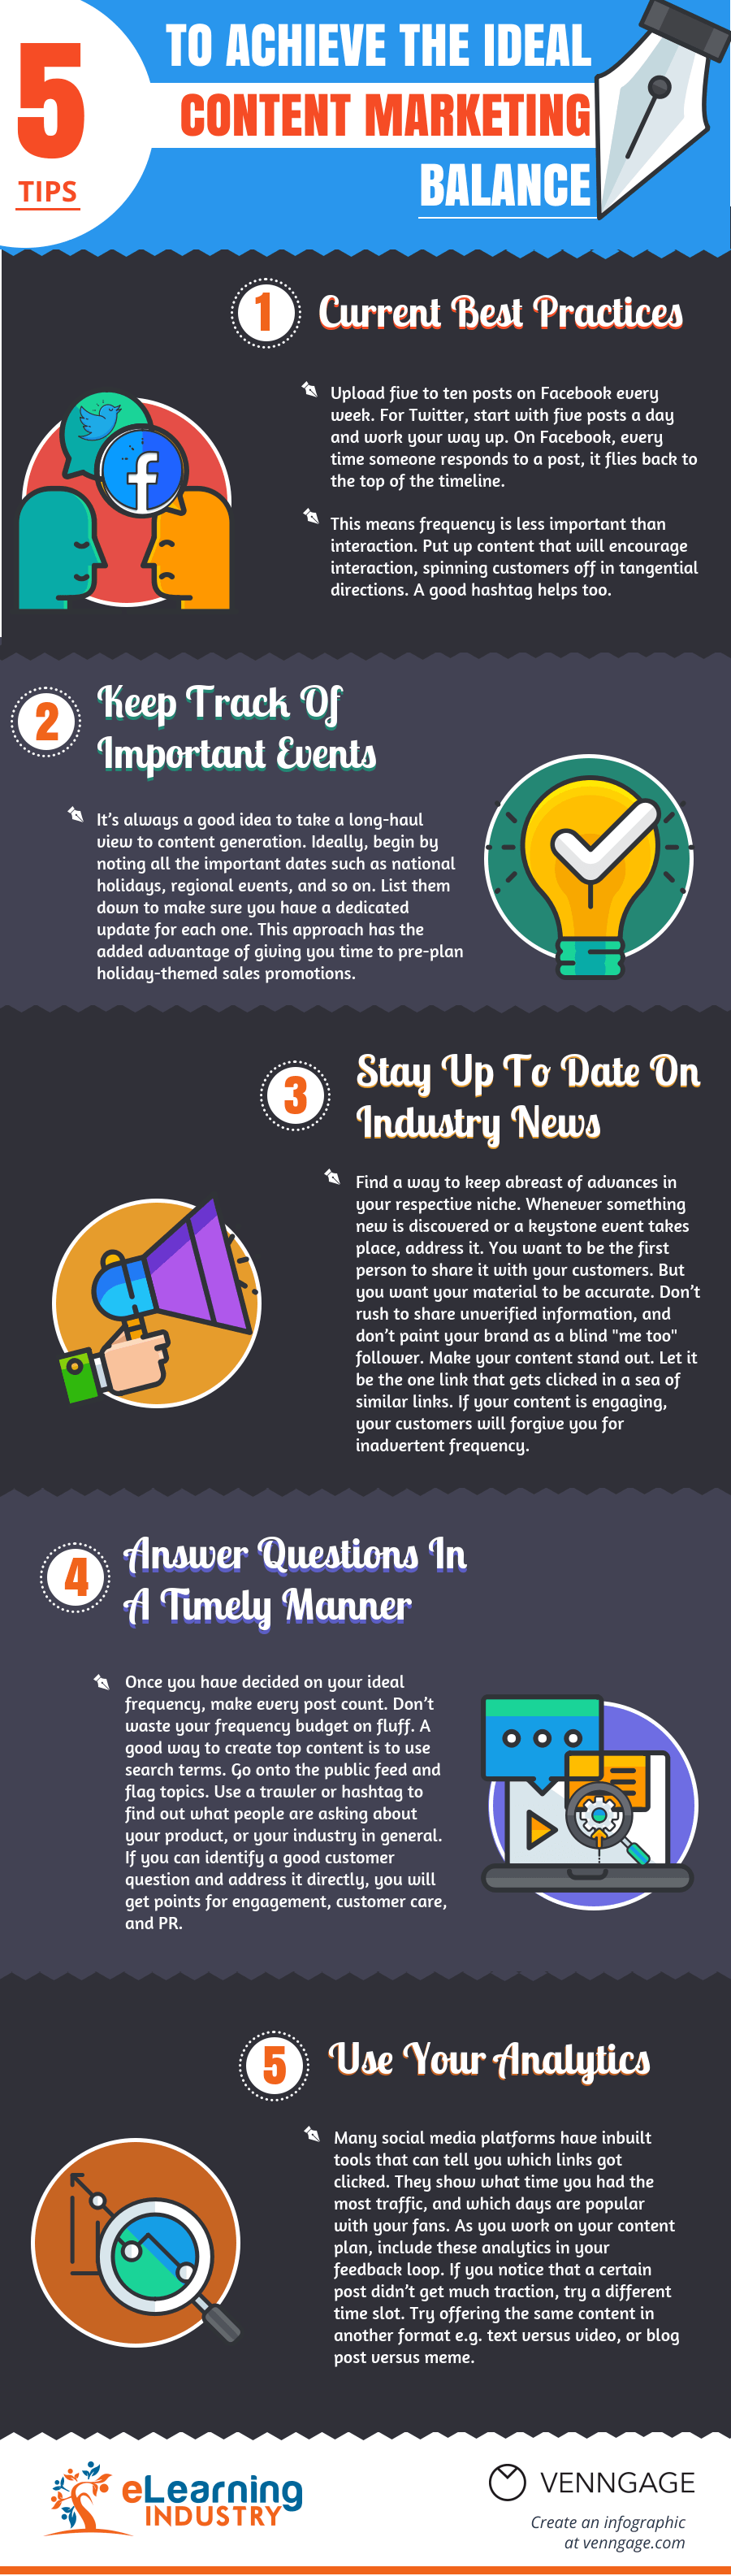 5 Tips To Achieve The Ideal Content Marketing Balance Infographic